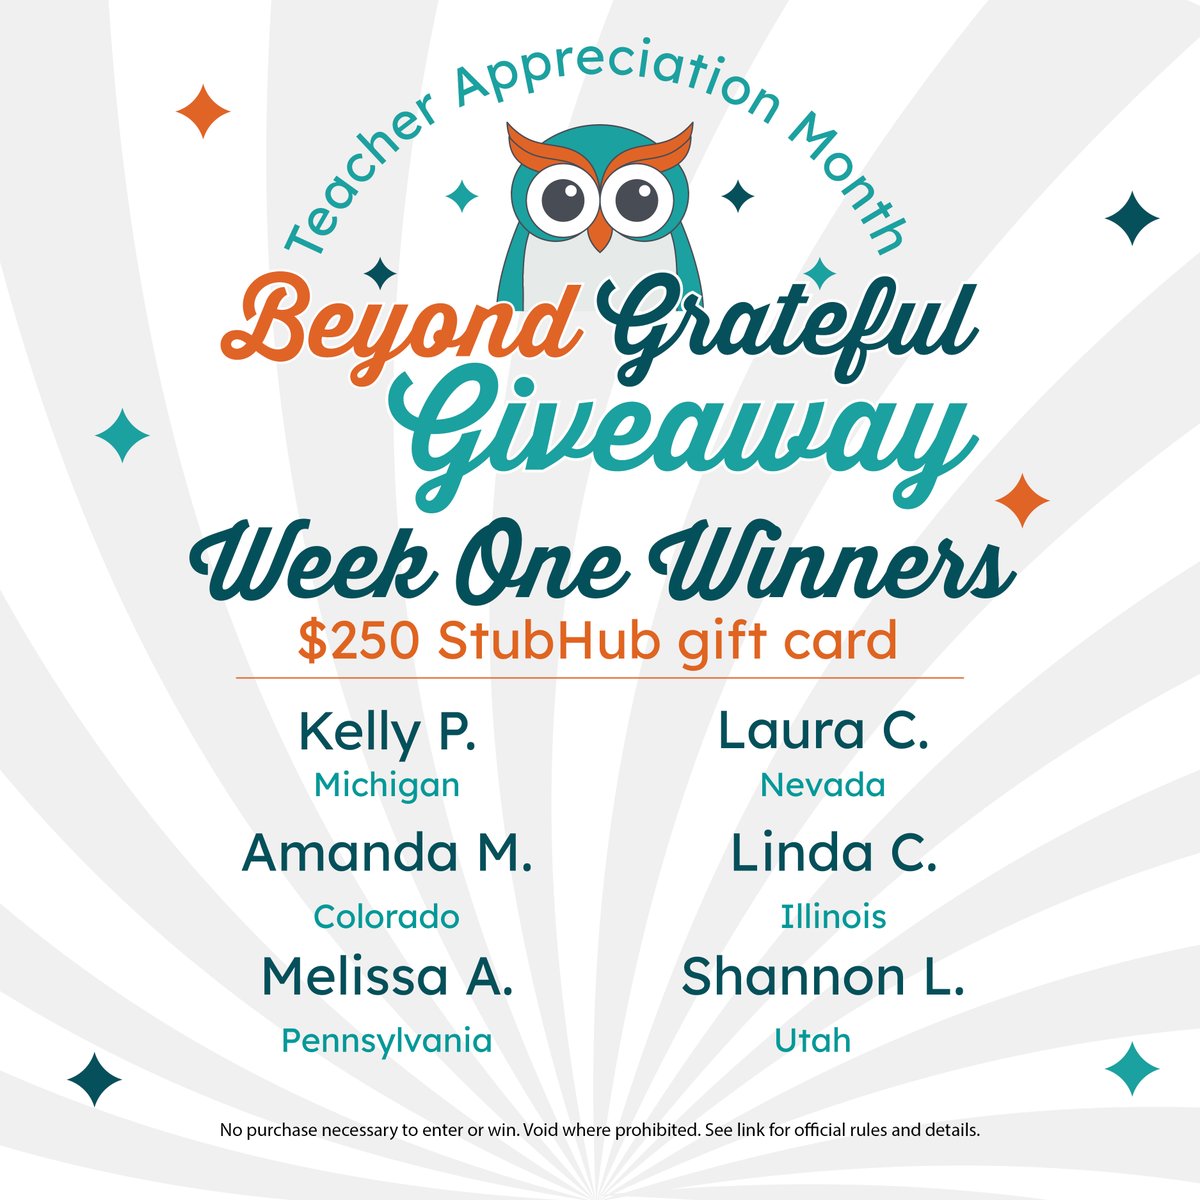 Congratulations to our winners! Next week’s prizes are two $500 Apple Gift Cards and a $500 Oura gift card! If you’ve already entered, then you’re in the running for next week’s prizes, and if you haven’t entered yet, enter here: ow.ly/OWjT50Rmyim #HMBeyondGrateful